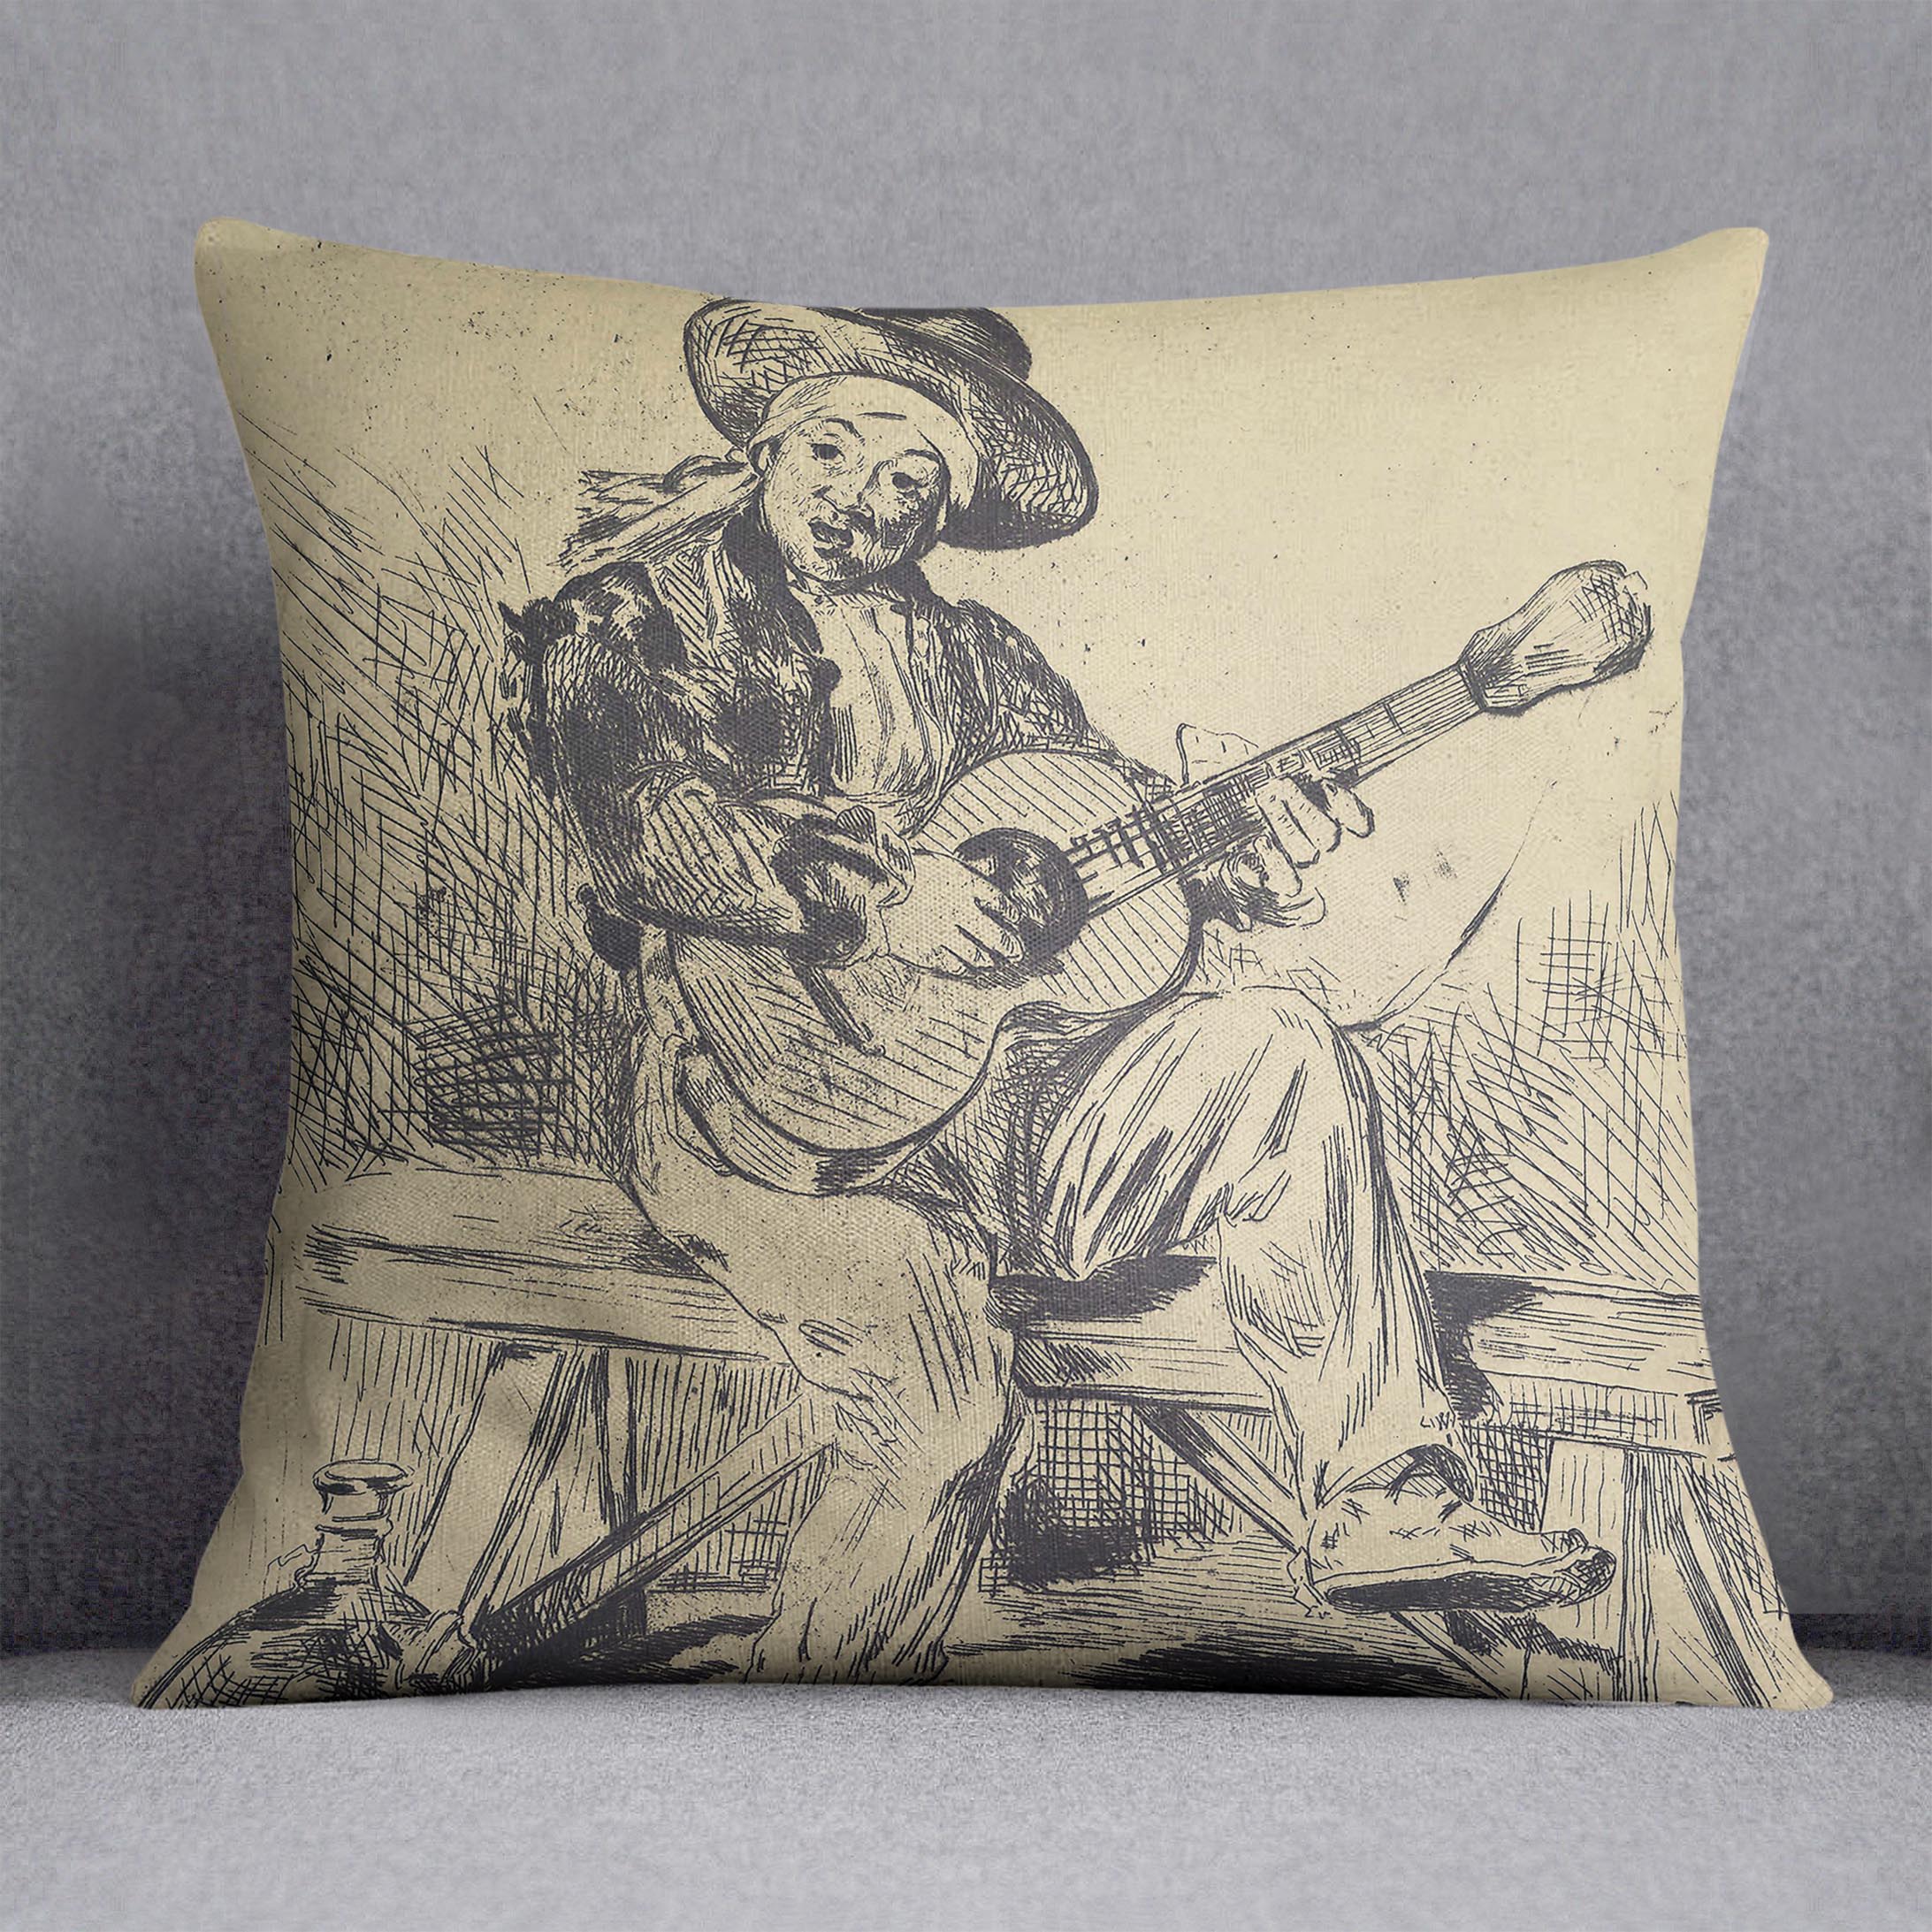 The guitar Player by Manet Cushion